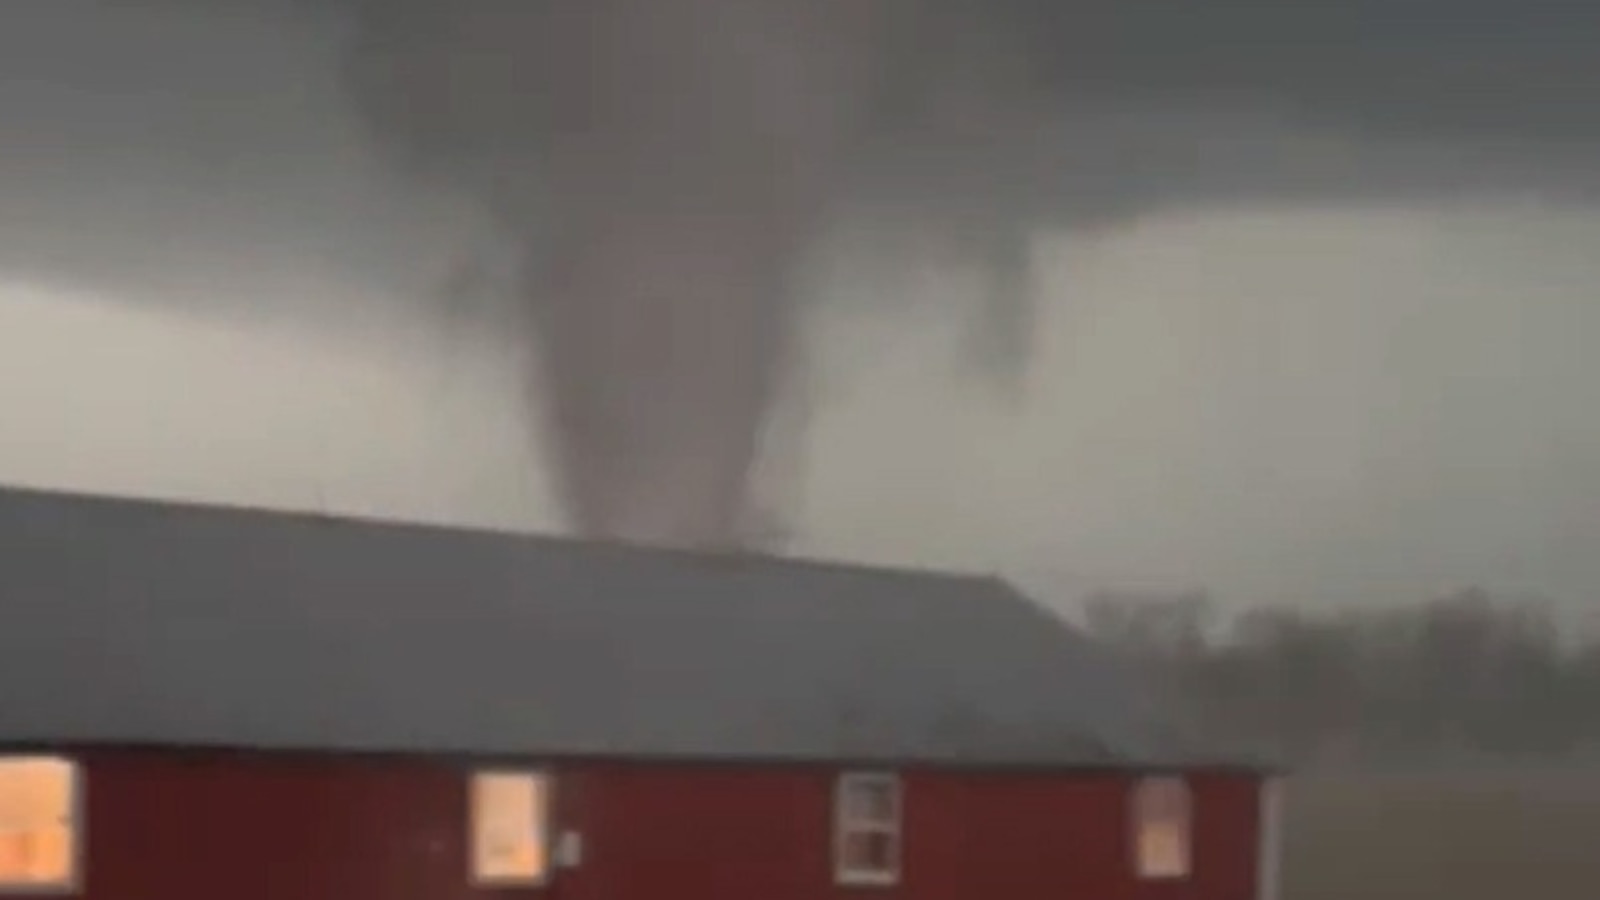 At least 3 dead after suspected tornado touched down in Indiana Police